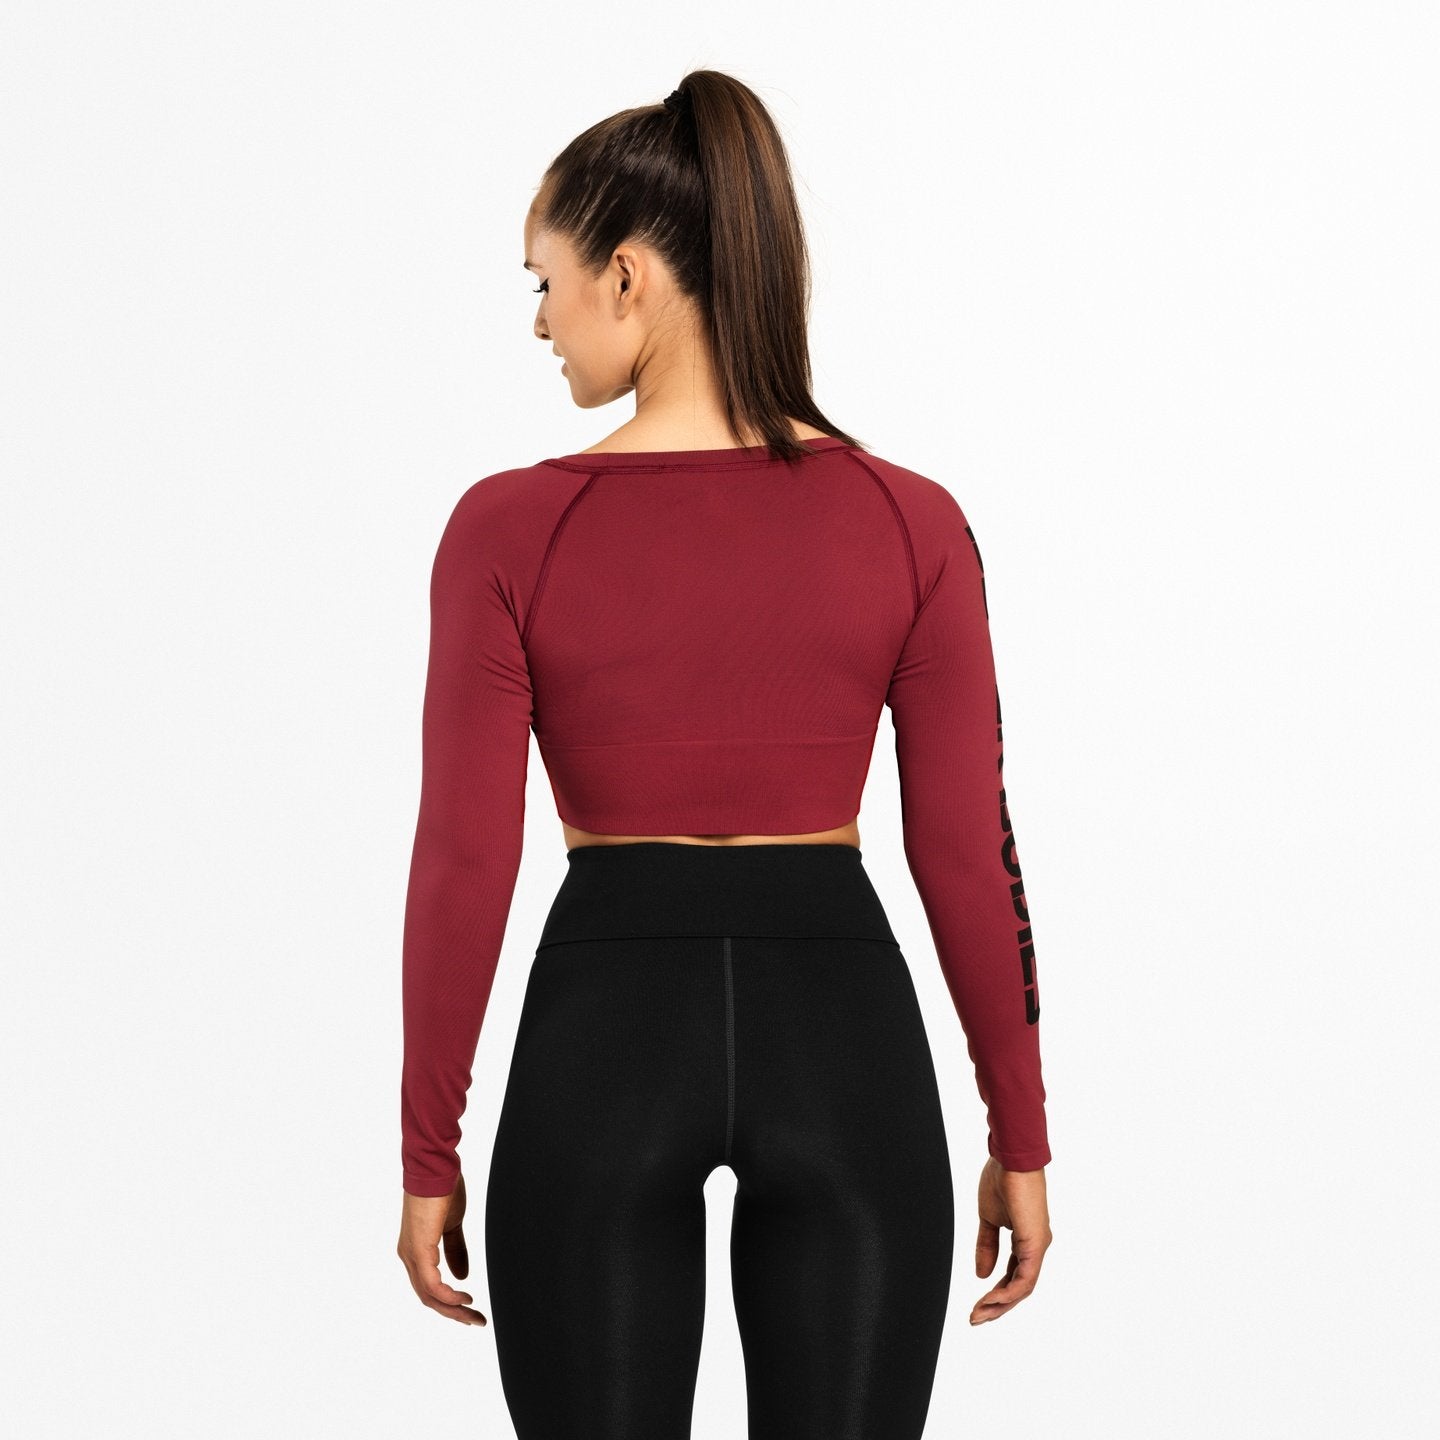 BetterBodies Bowery Cropped L/S Sangria Red